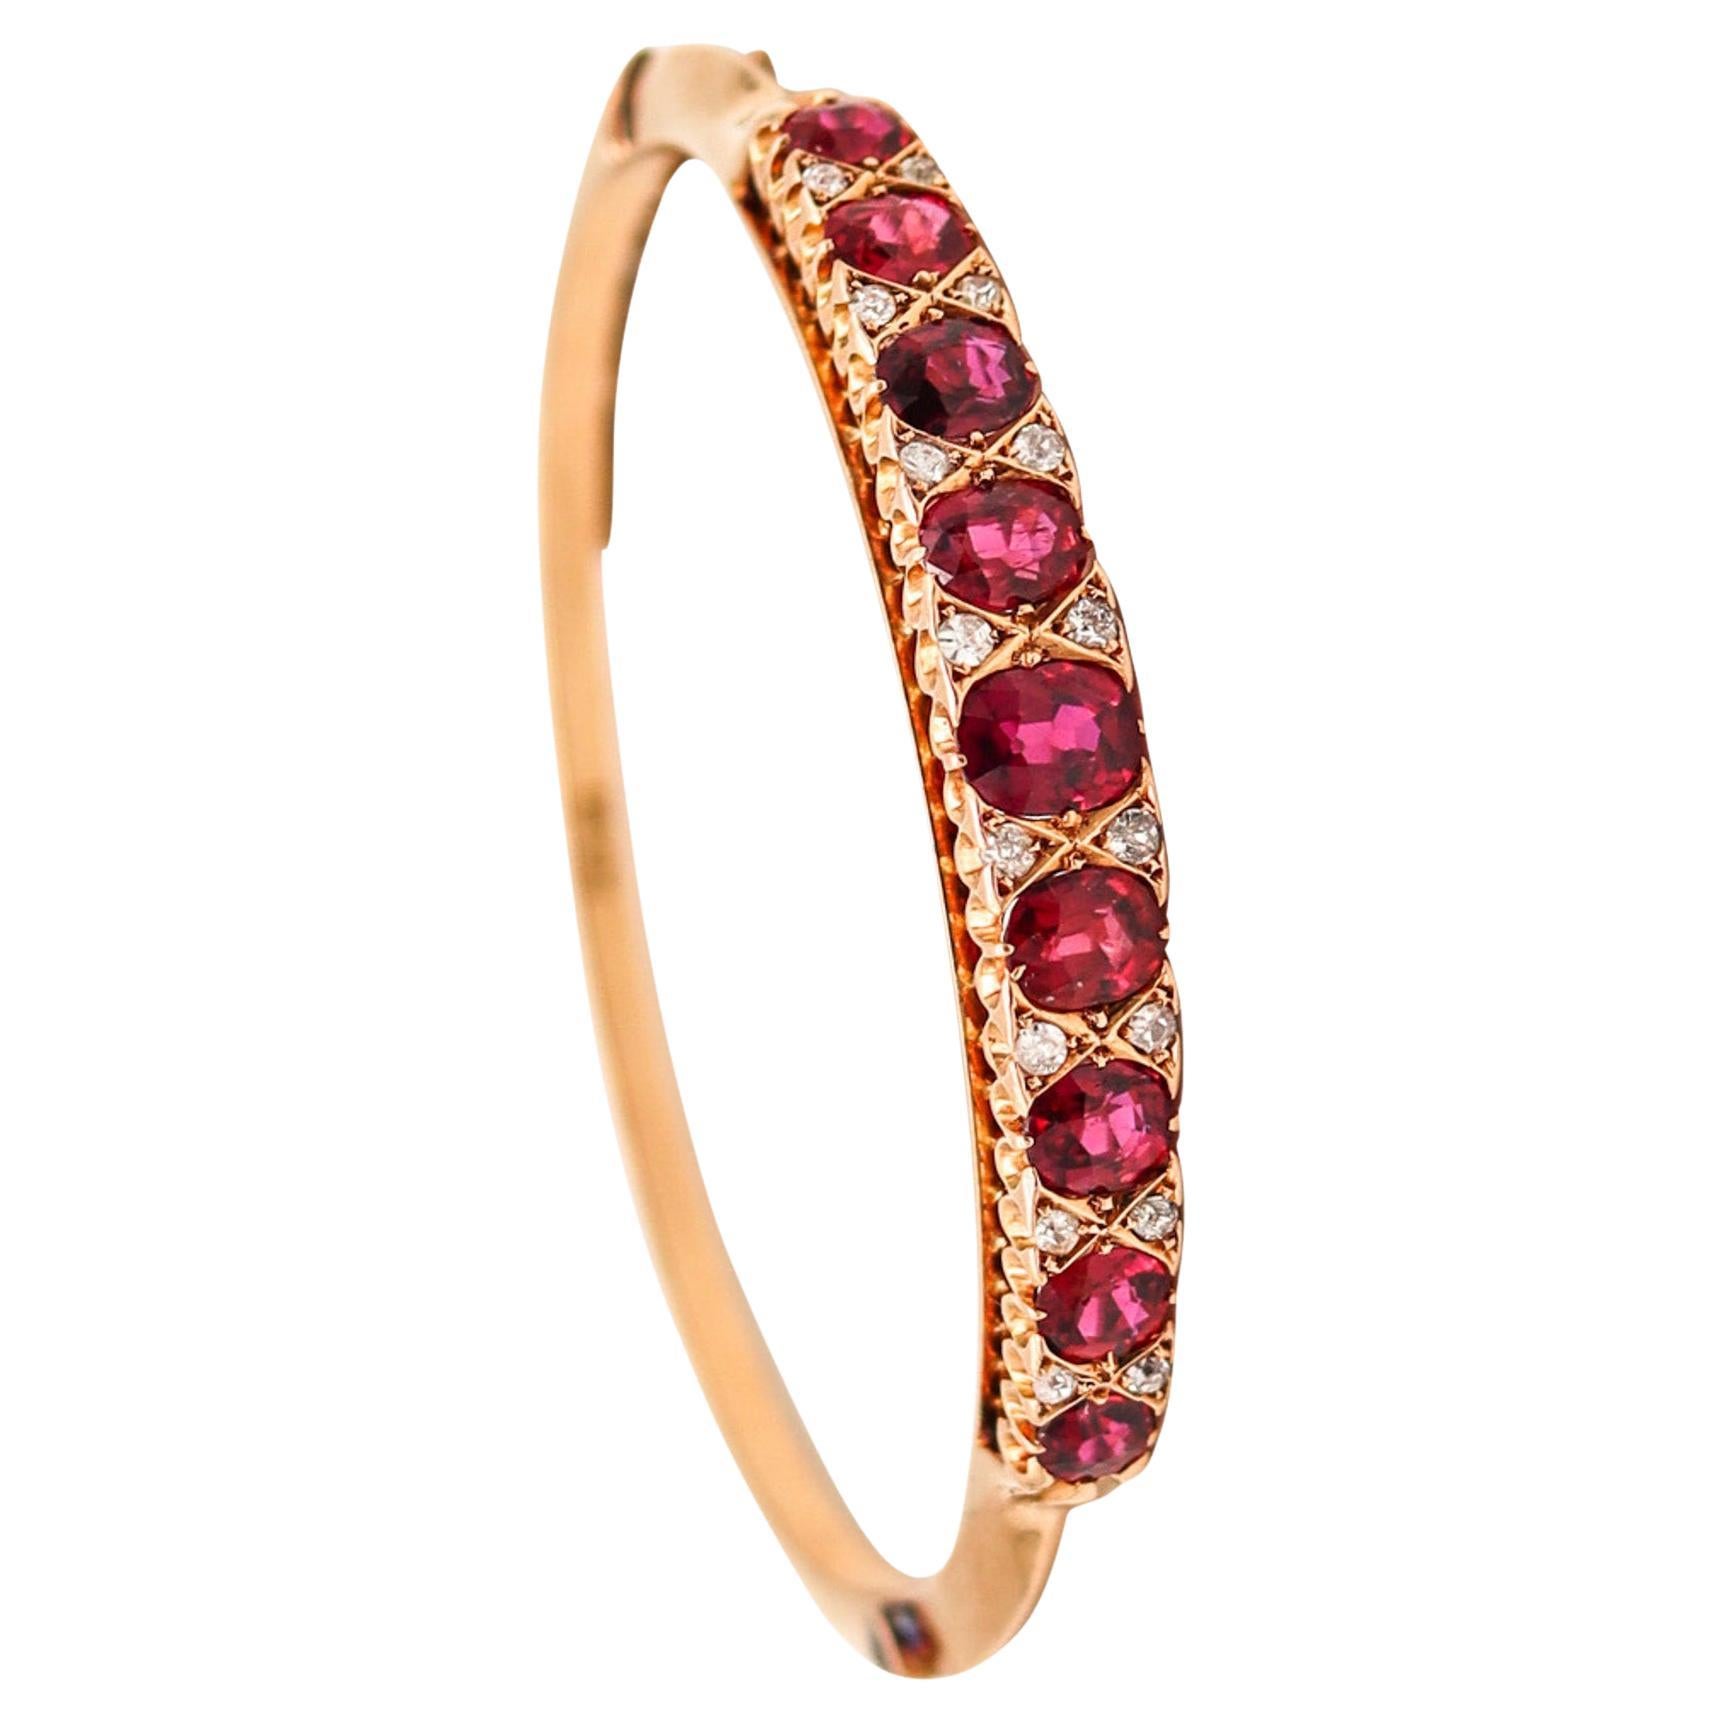 Victorian 1880 Bangle Bracelet In 15kt Gold With 14.35 Ctw Rubies And Diamonds